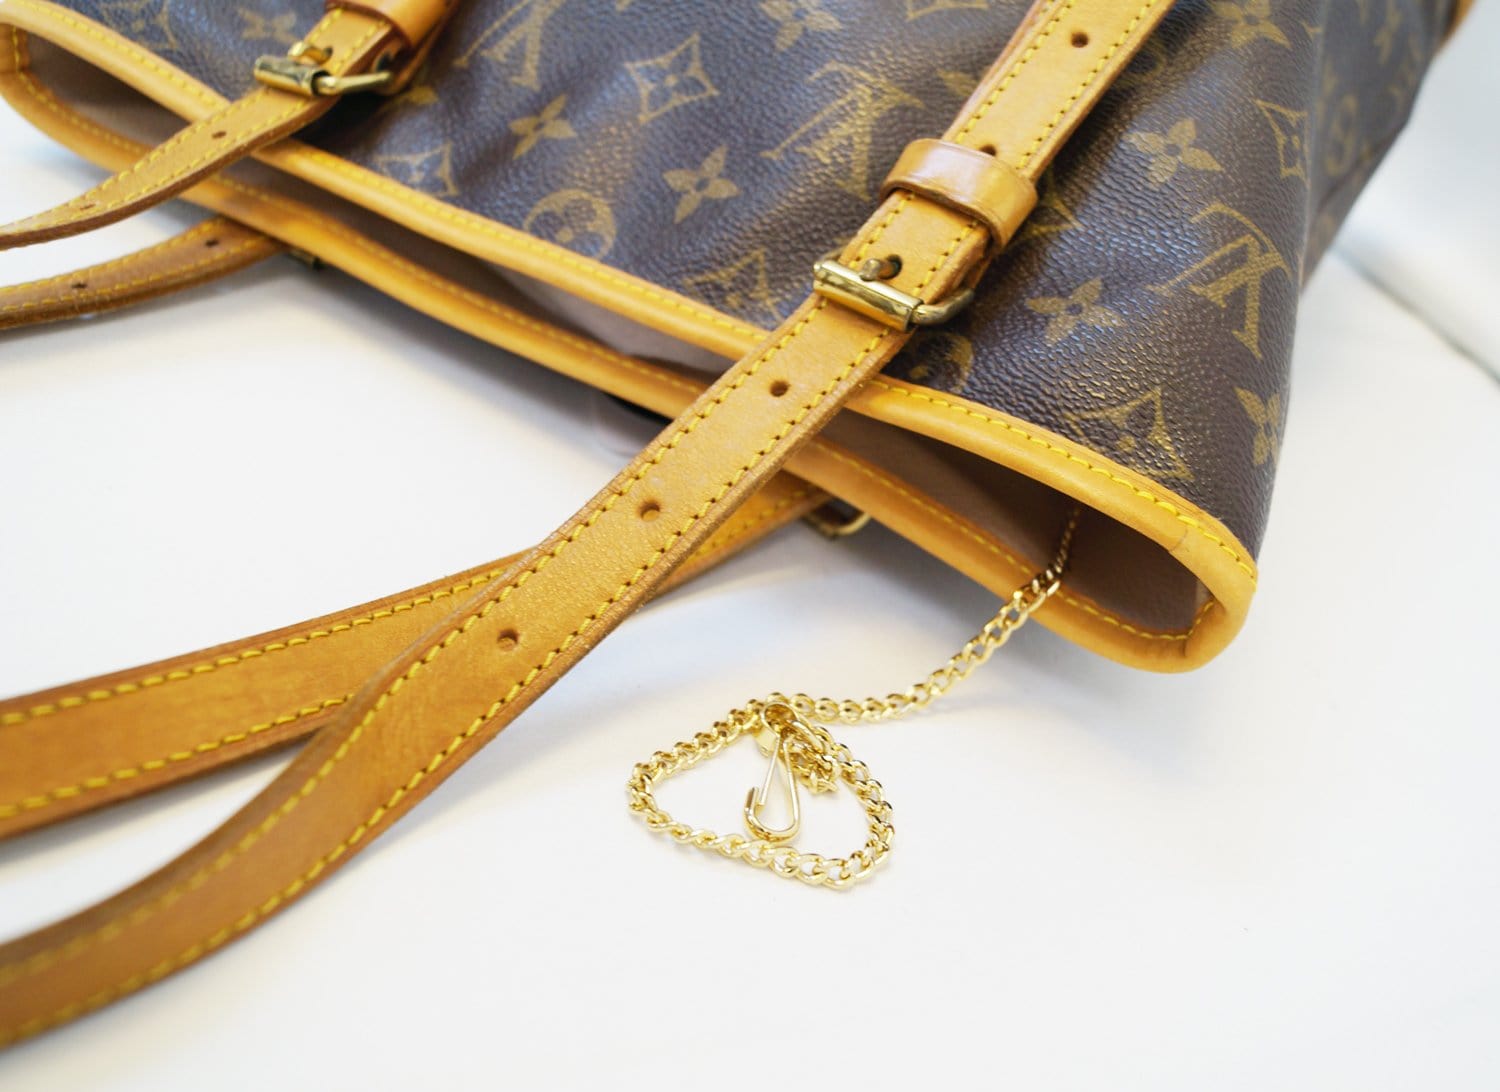 The Brown 2 Tone LV Bag is on 𝓣𝓻𝓮𝓷𝓭!! - Turning Heads Xo.